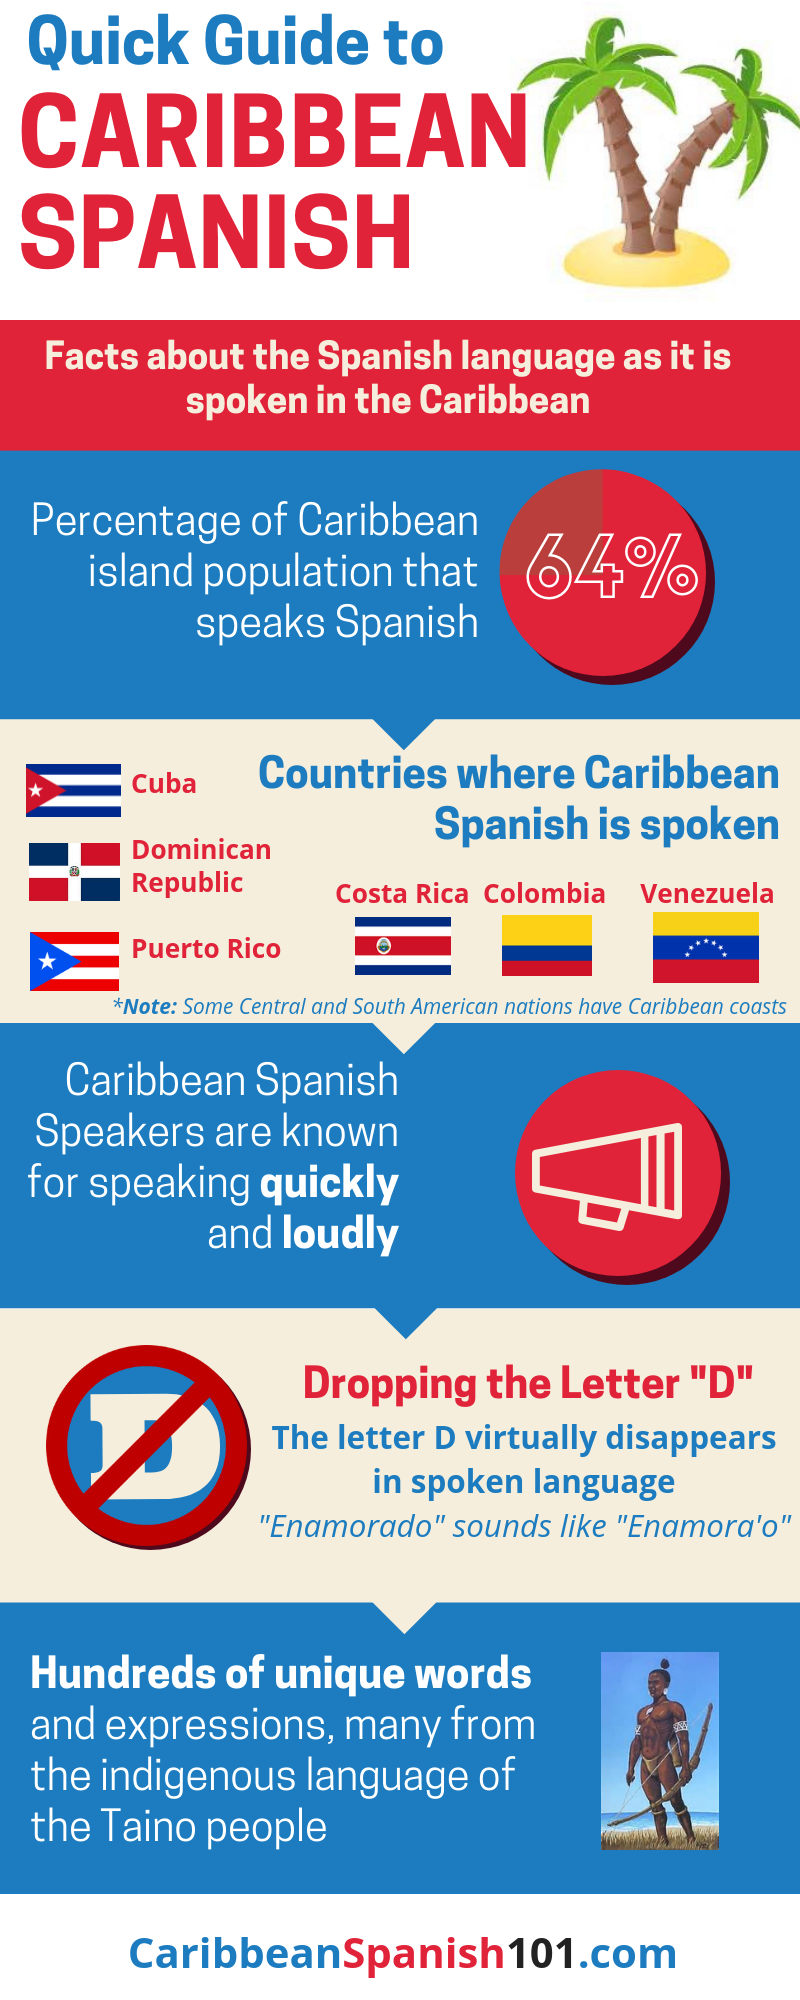 31 Dominican Slang Terms for Your Next Caribbean Getaway